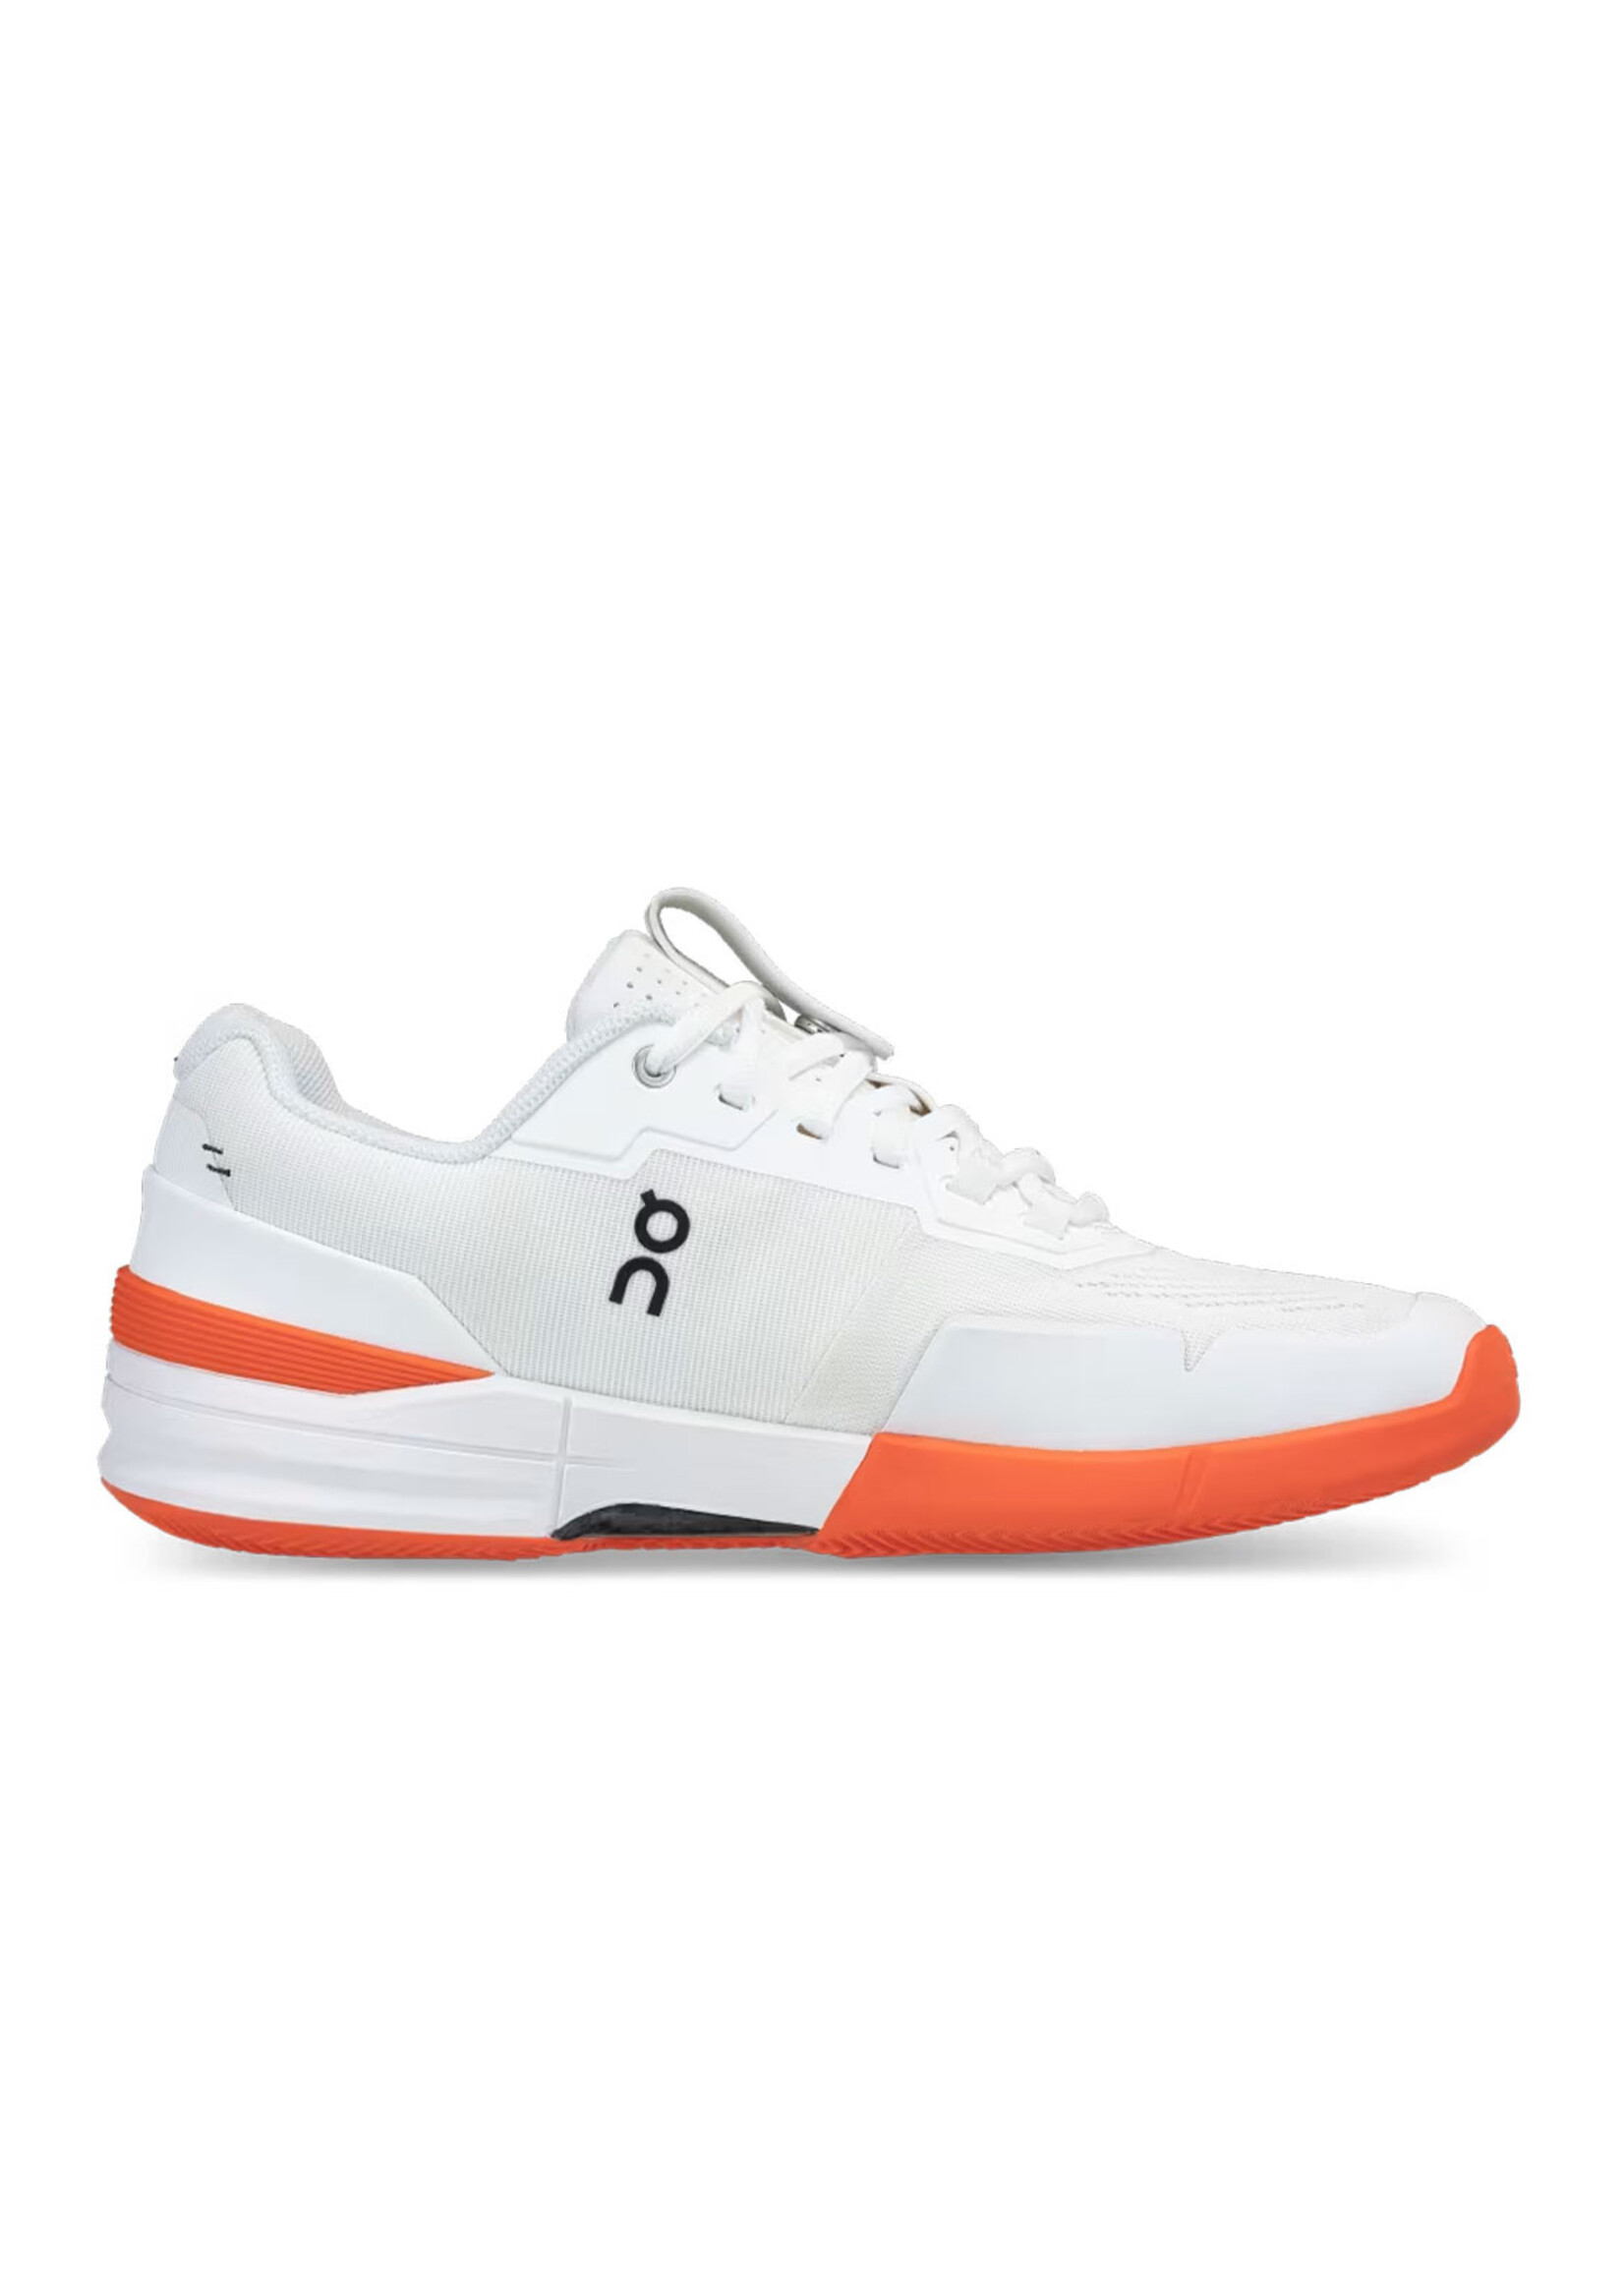 ON On The Roger Pro Clay Men's Tennis Shoes